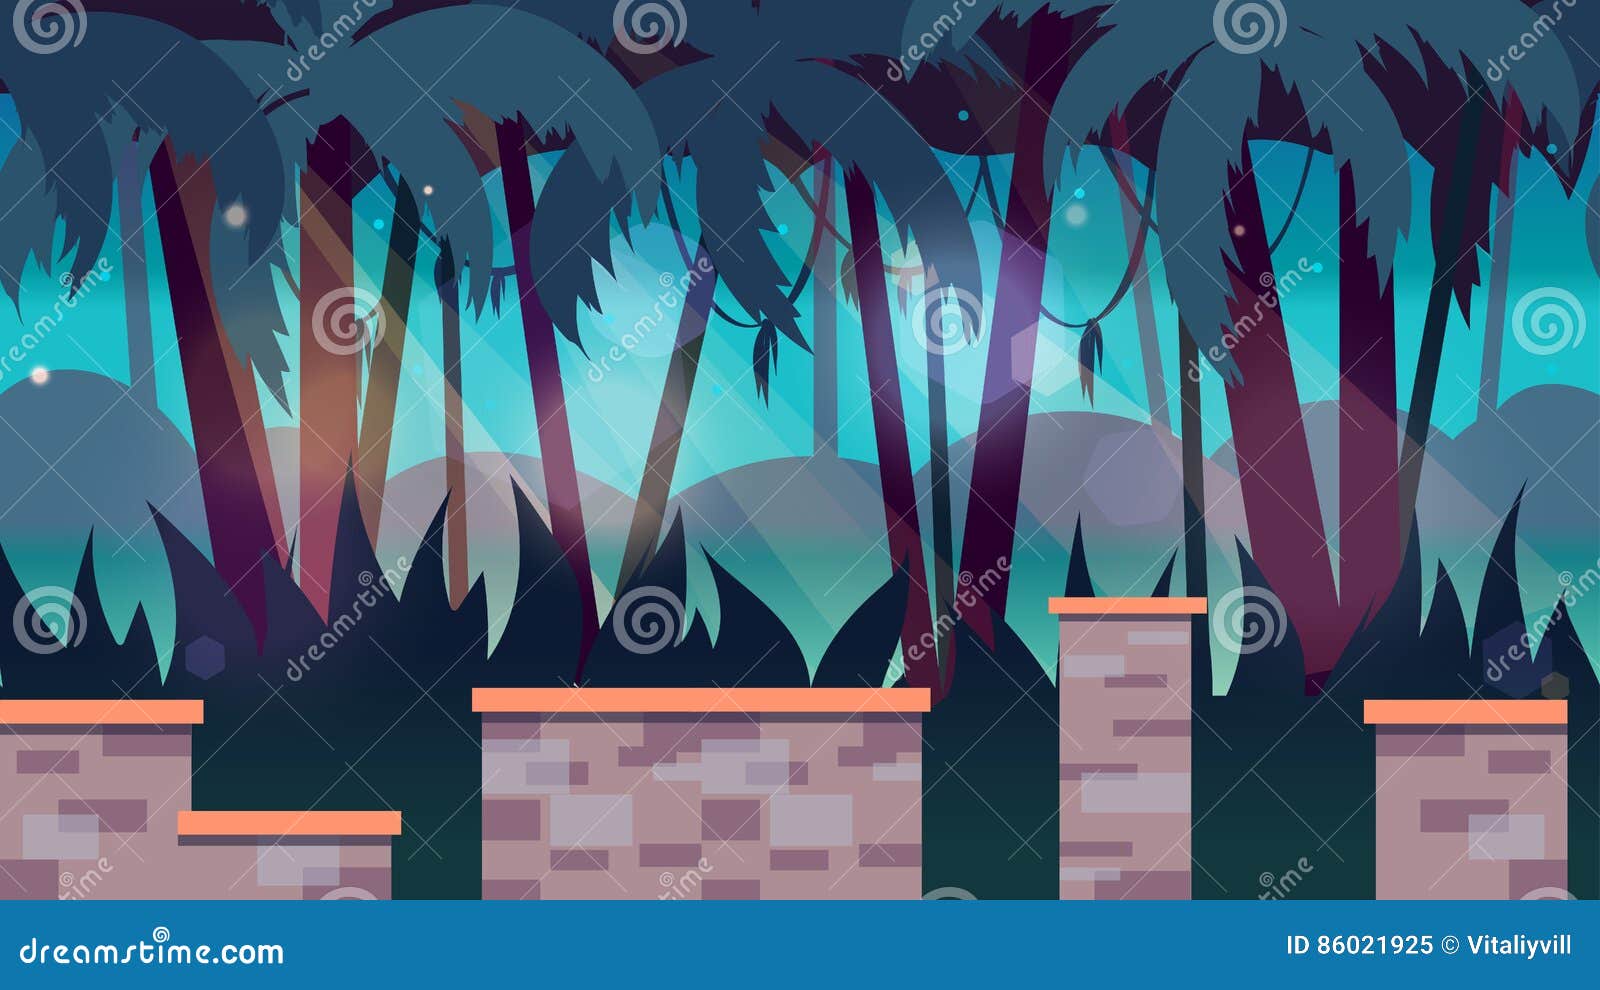 Dark Jungles Game Background 2d Game Application. Vector Design. Tileable  Horizontally. Size 1920x1080. Stock Vector - Illustration of background,  design: 86021925